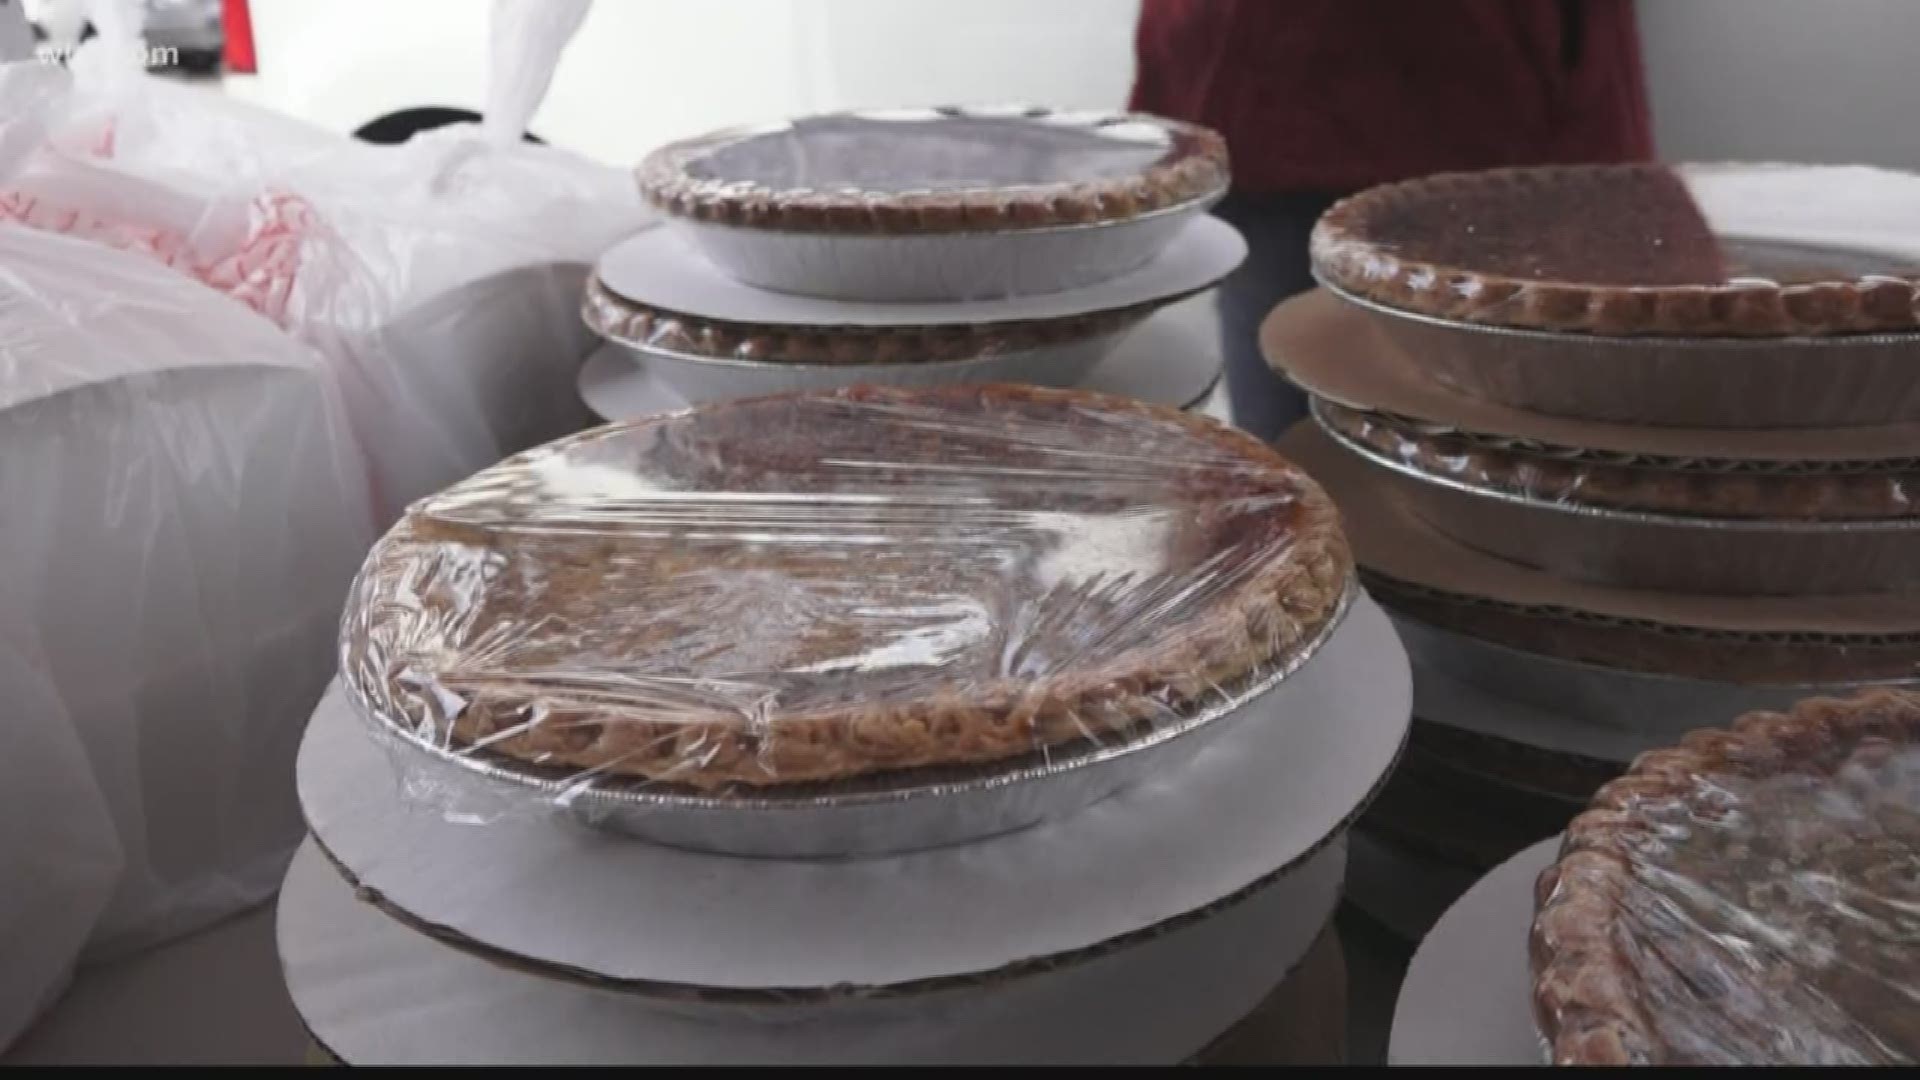 Just a few days before Thanksgiving was the University of South Carolina's College of Hospitality Retail and Sport management's pie day.